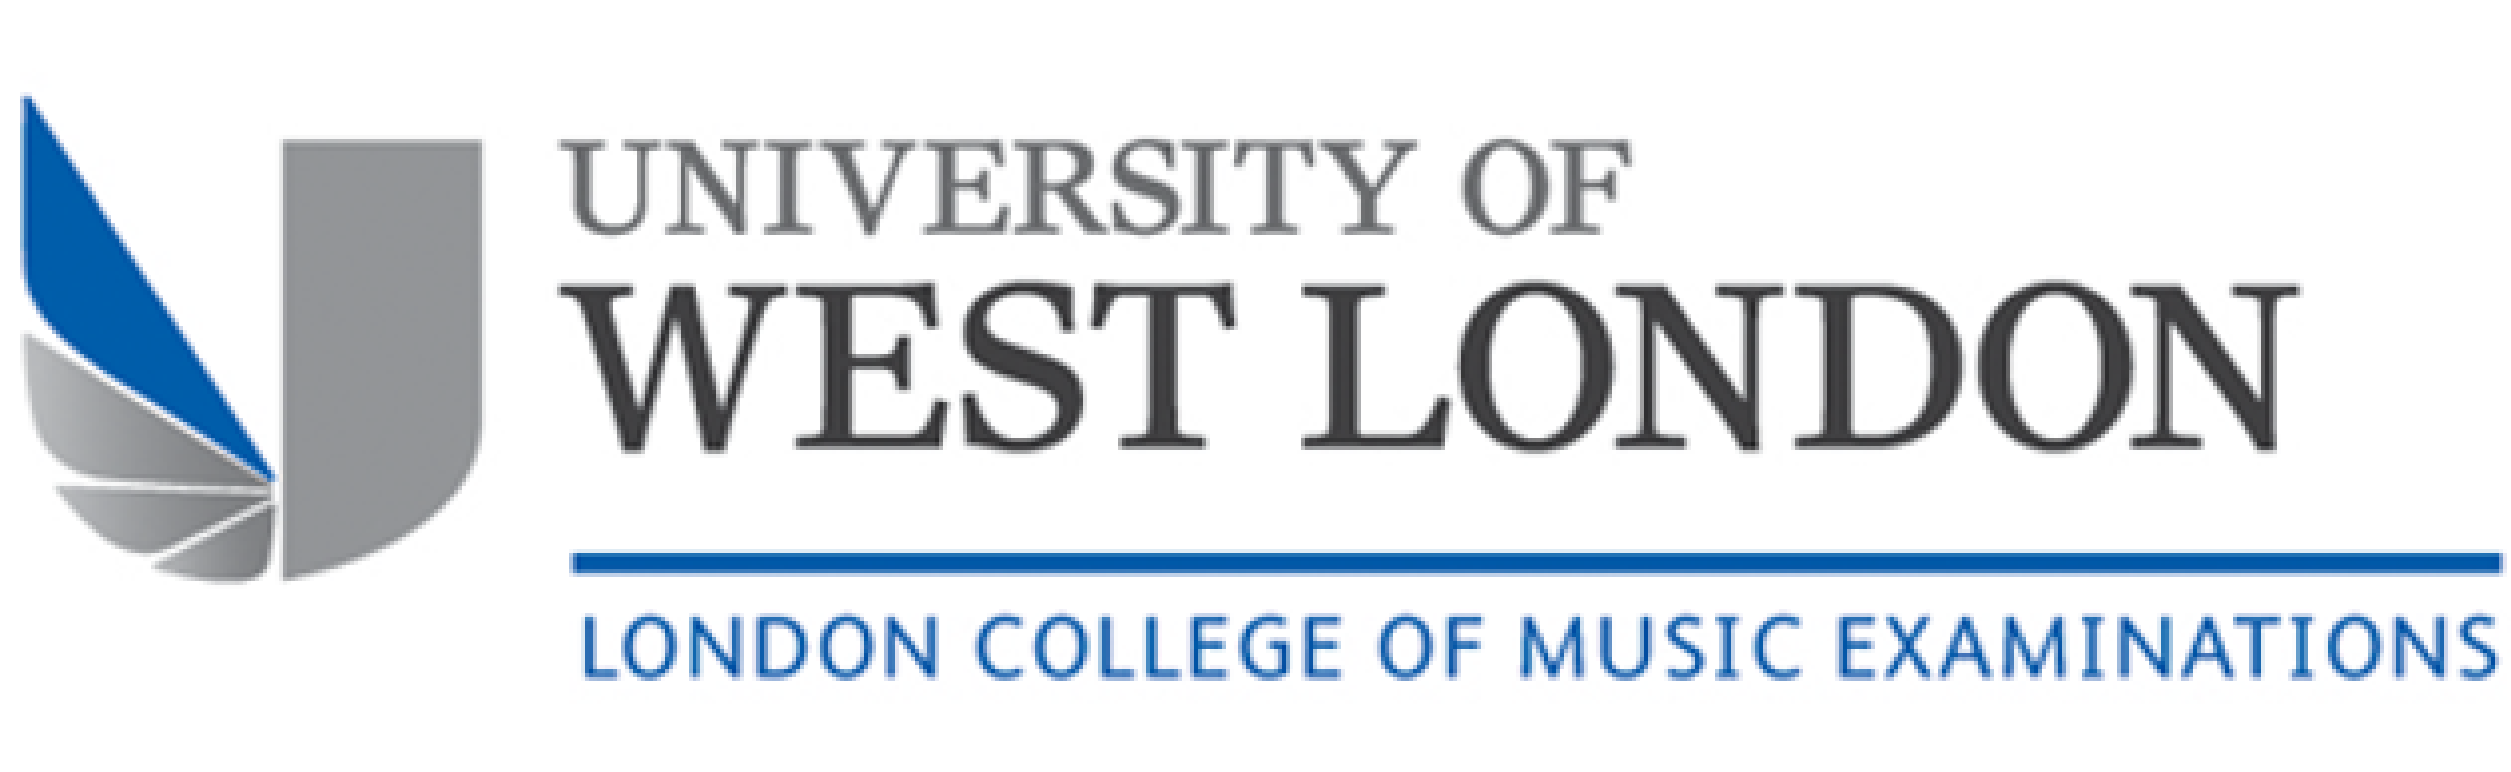 University of West London - London College of Music Examinations